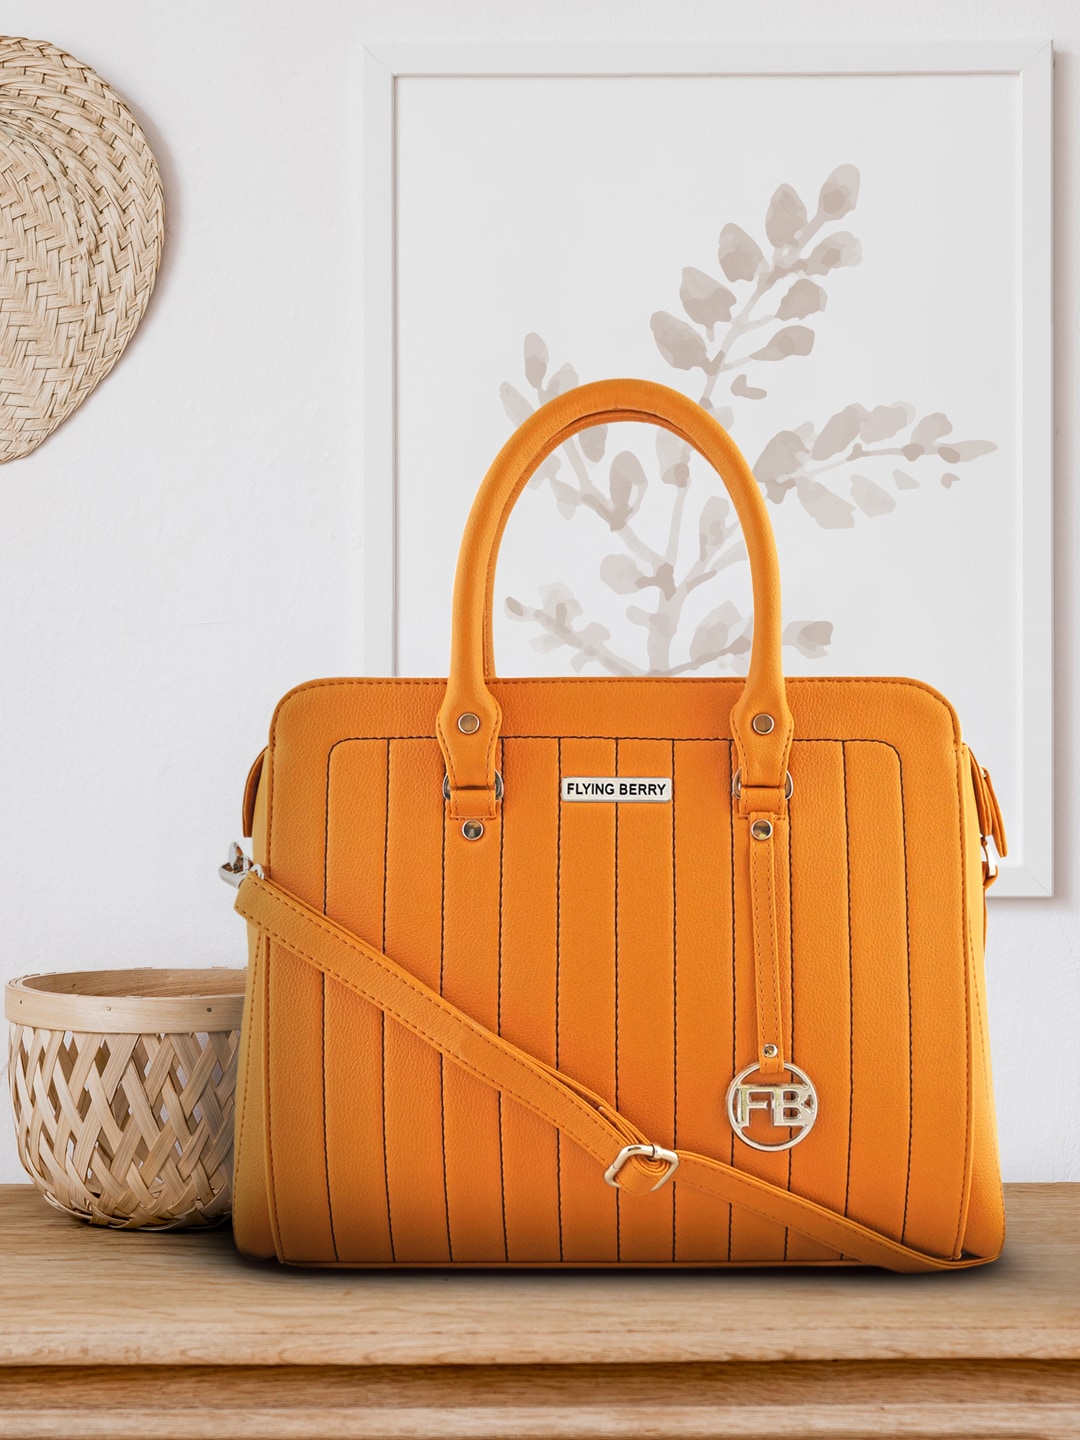 FLYING BERRY Orange Textured PU Structured Handheld Bag Price in India